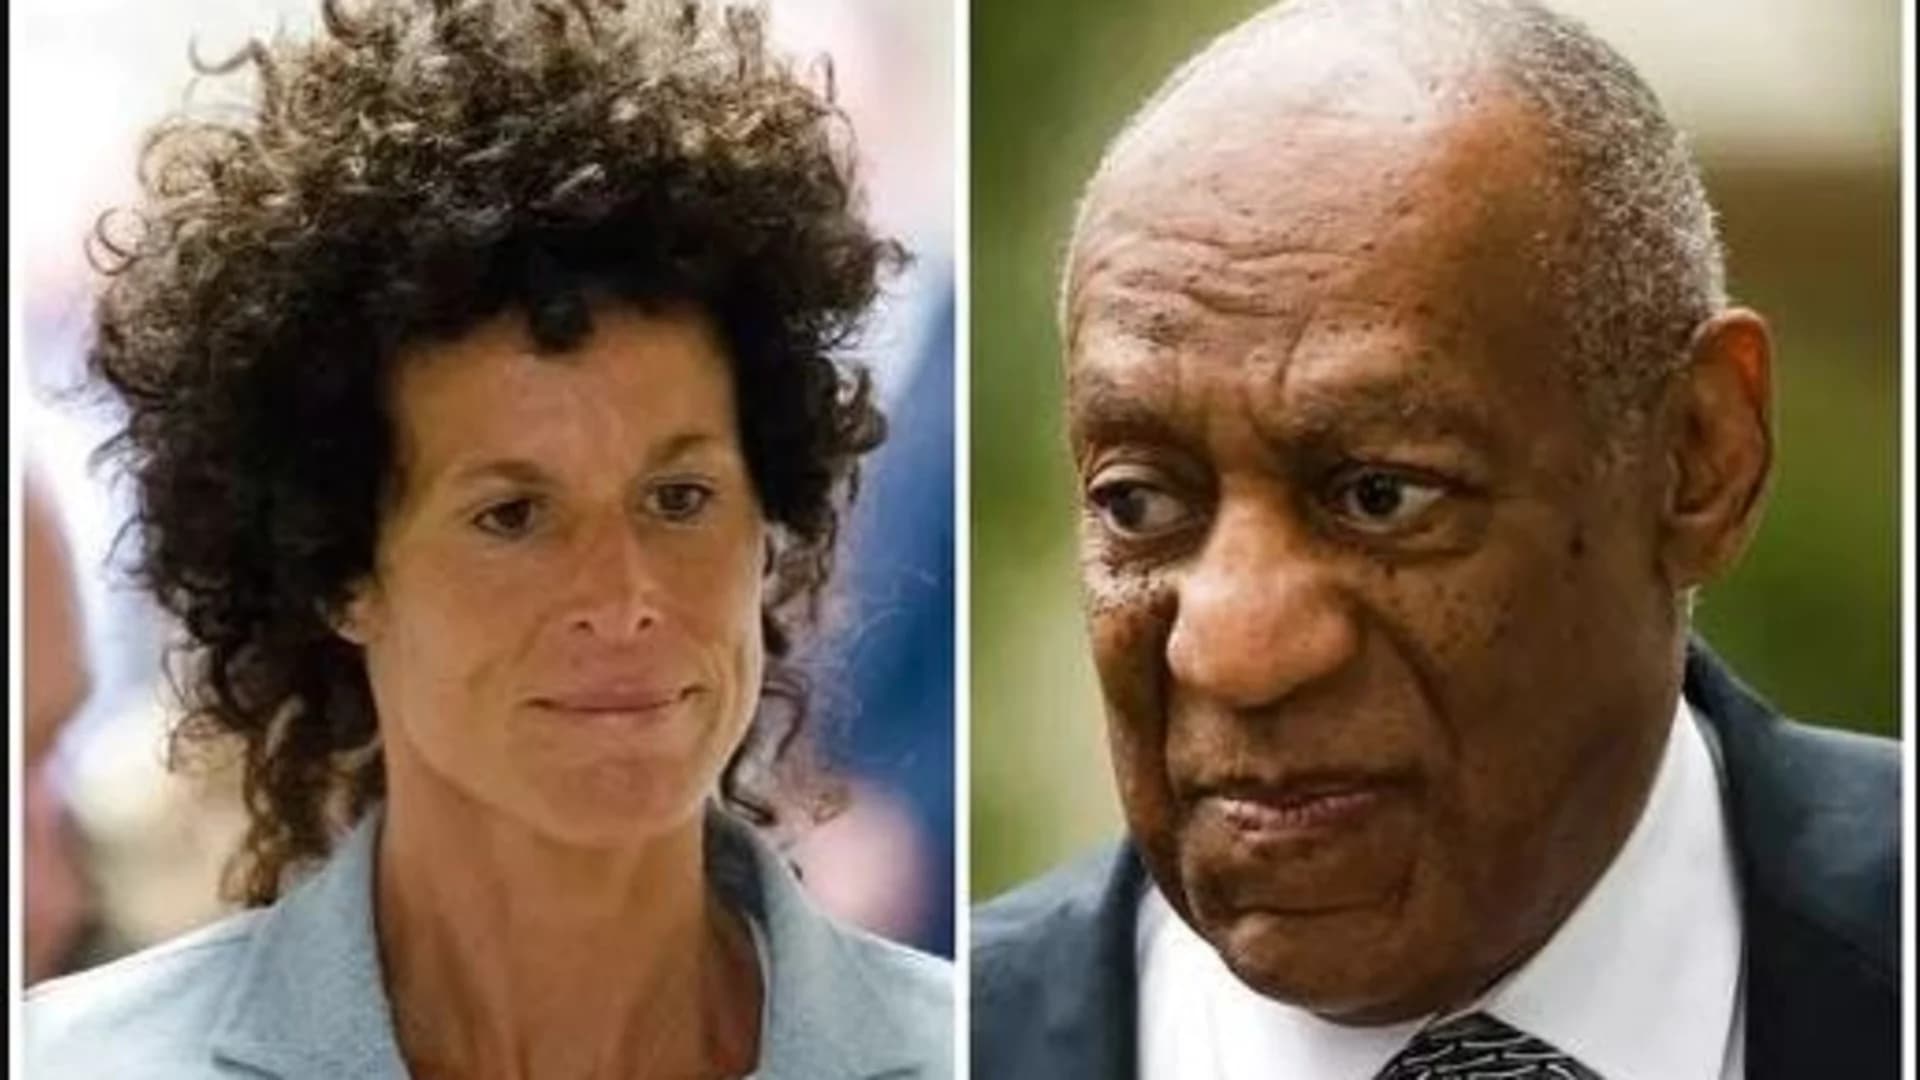 Cosby charges remain as lawyers fight to limit testimony